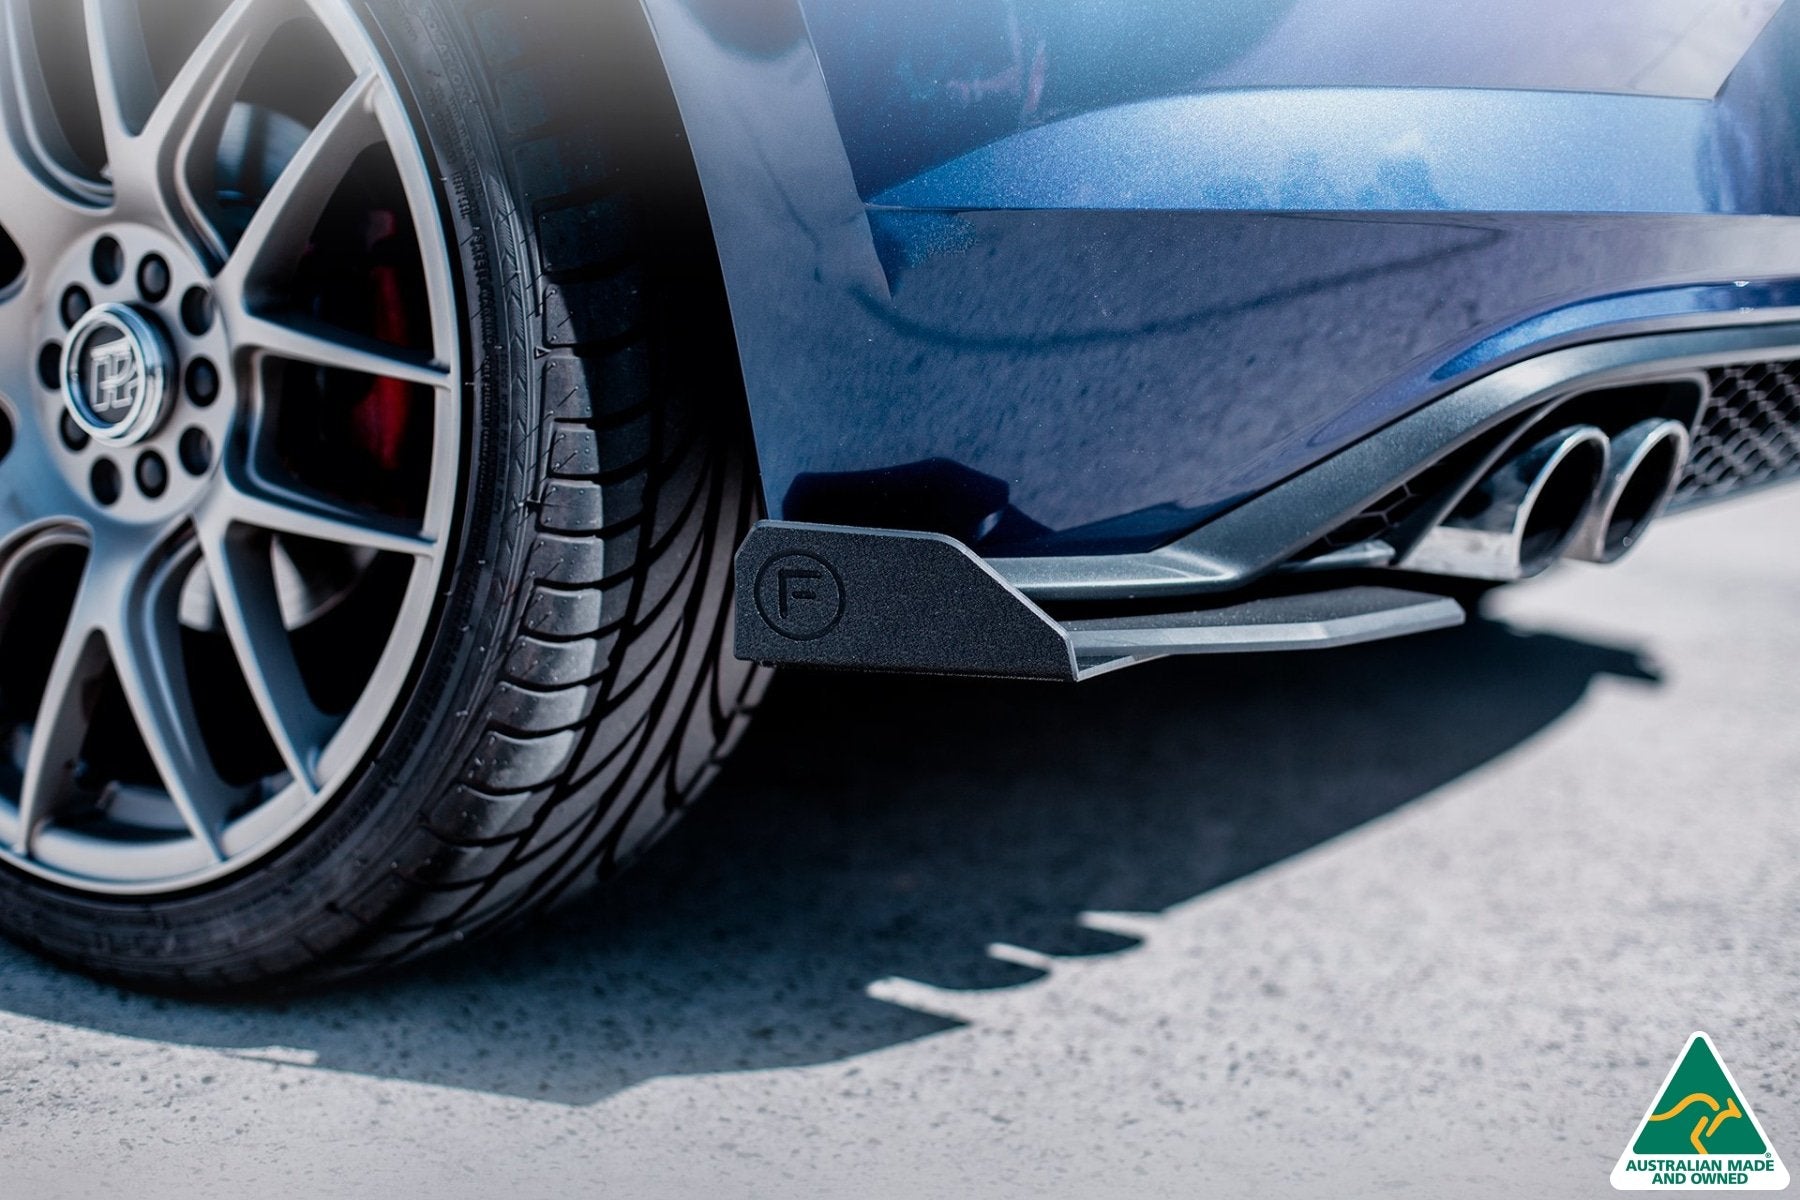 AW Polo GTI Rear Spats (Pair) - MODE Auto Concepts